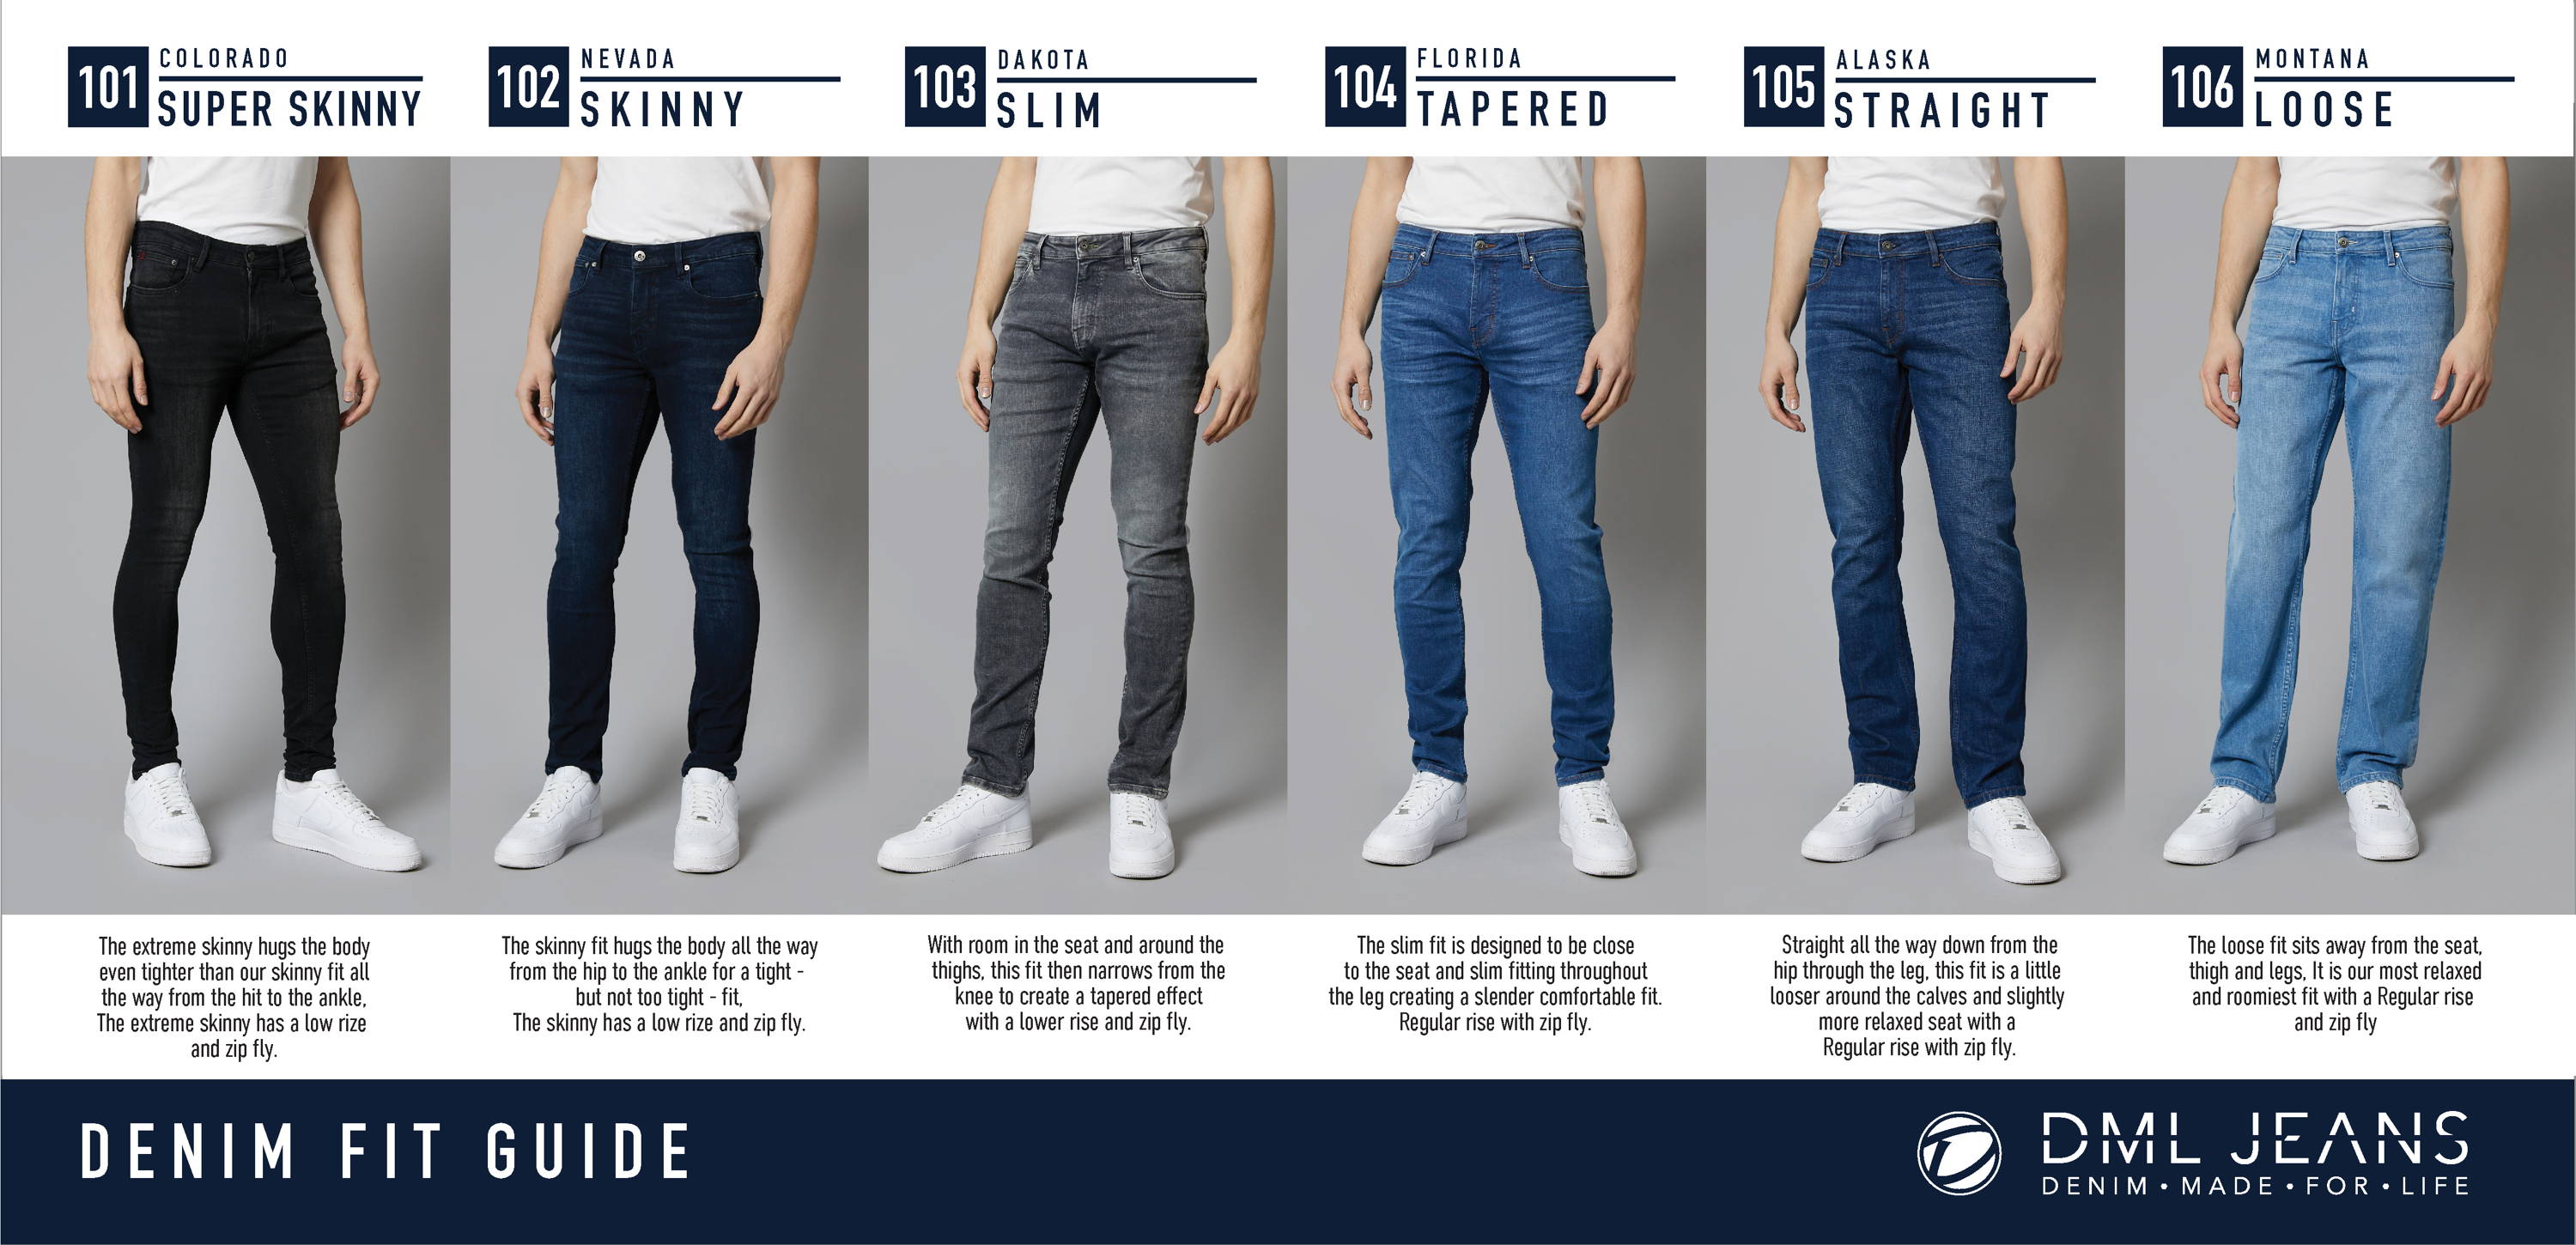 NEW FIT GUIDE | DML Jeans